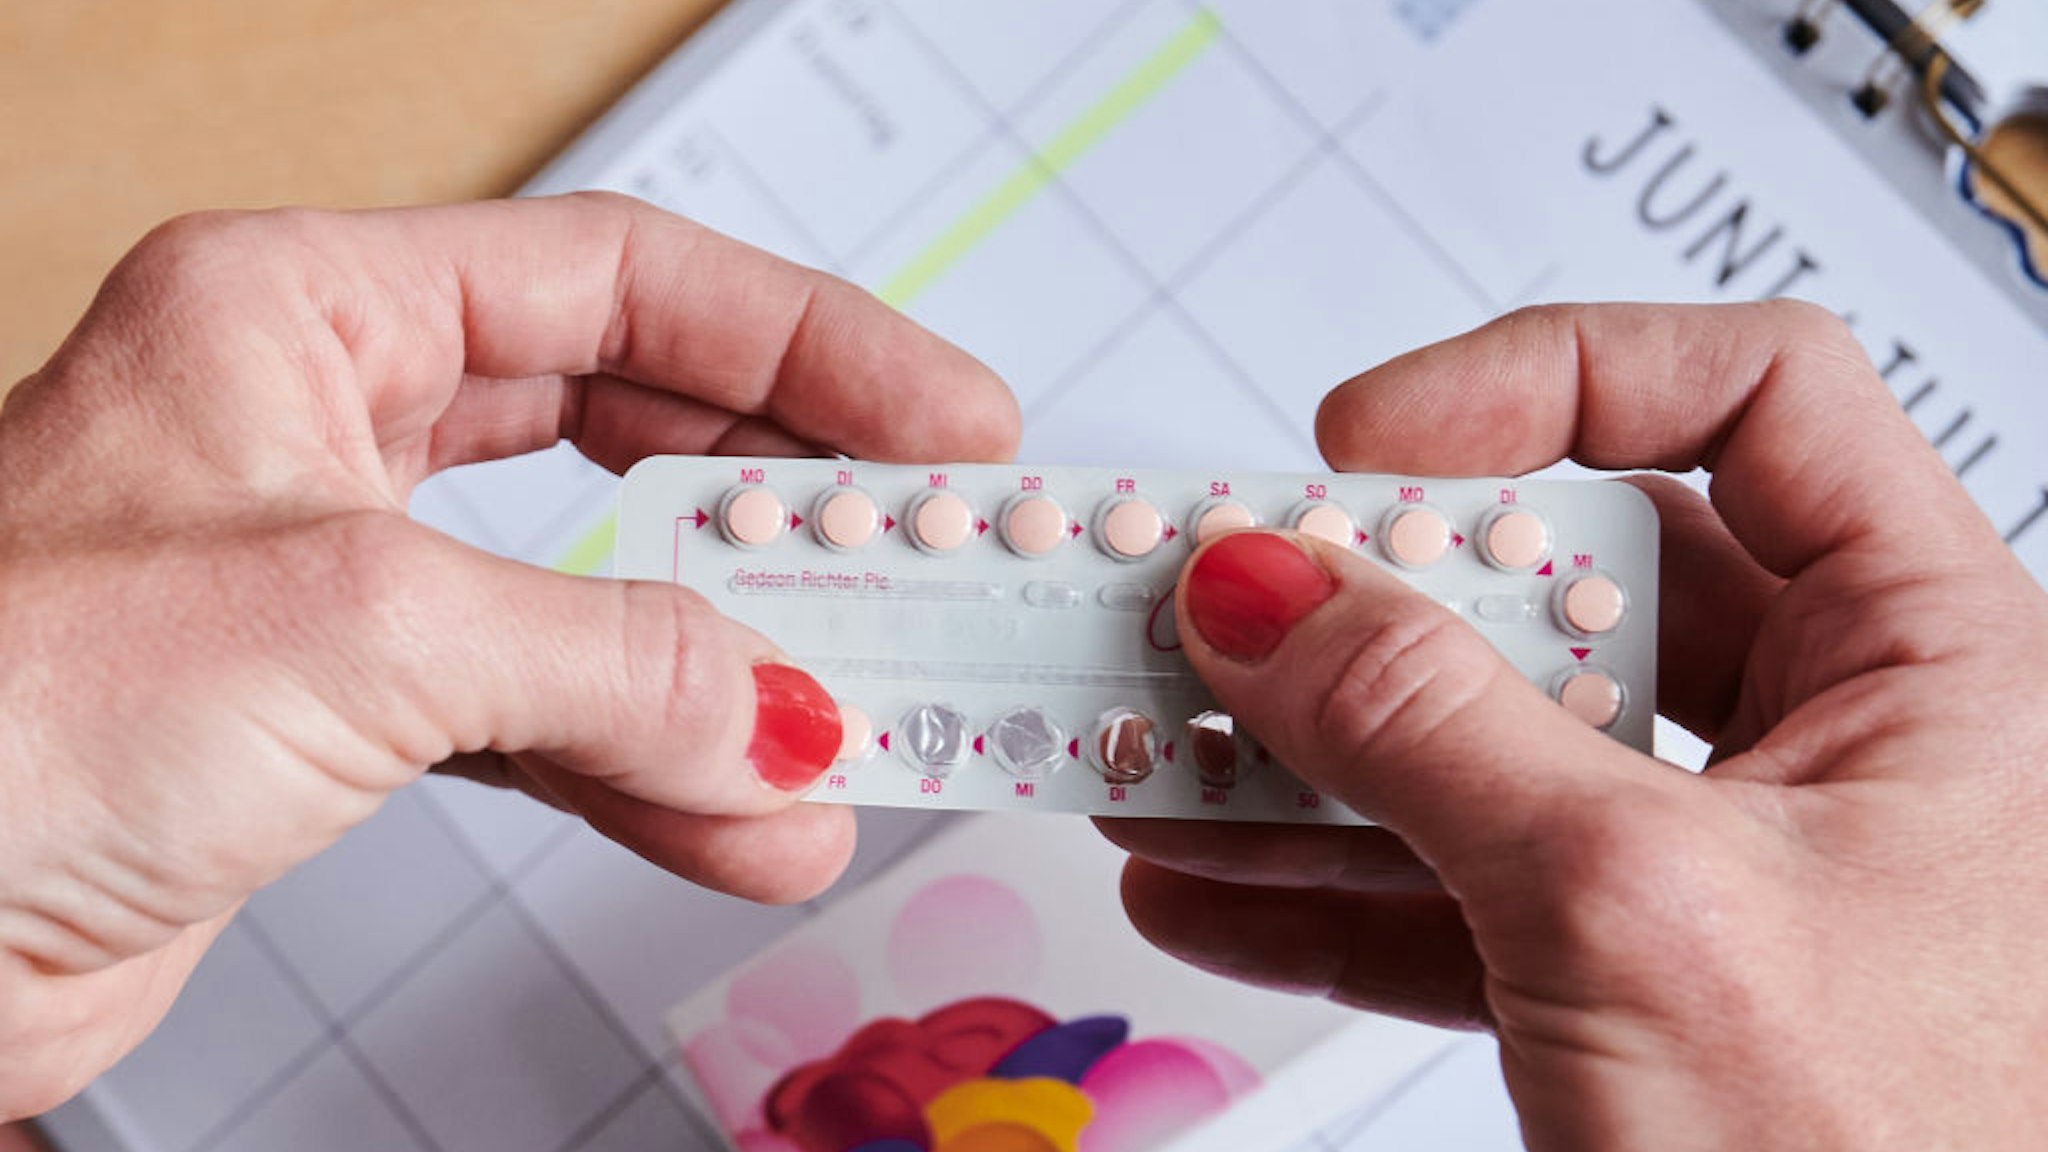 SYMBOL - 25 May 2021, Berlin: Above a calendar, a woman takes the next pill from the monthly pack of the contraceptive pill. The contraceptive pill went on sale in Germany 60 years ago. (to dpa "Myth and milestone - 60 years of the pill in Germany ") Photo: Annette Riedl/dpa (Photo by Annette Riedl/picture alliance via Getty Images)